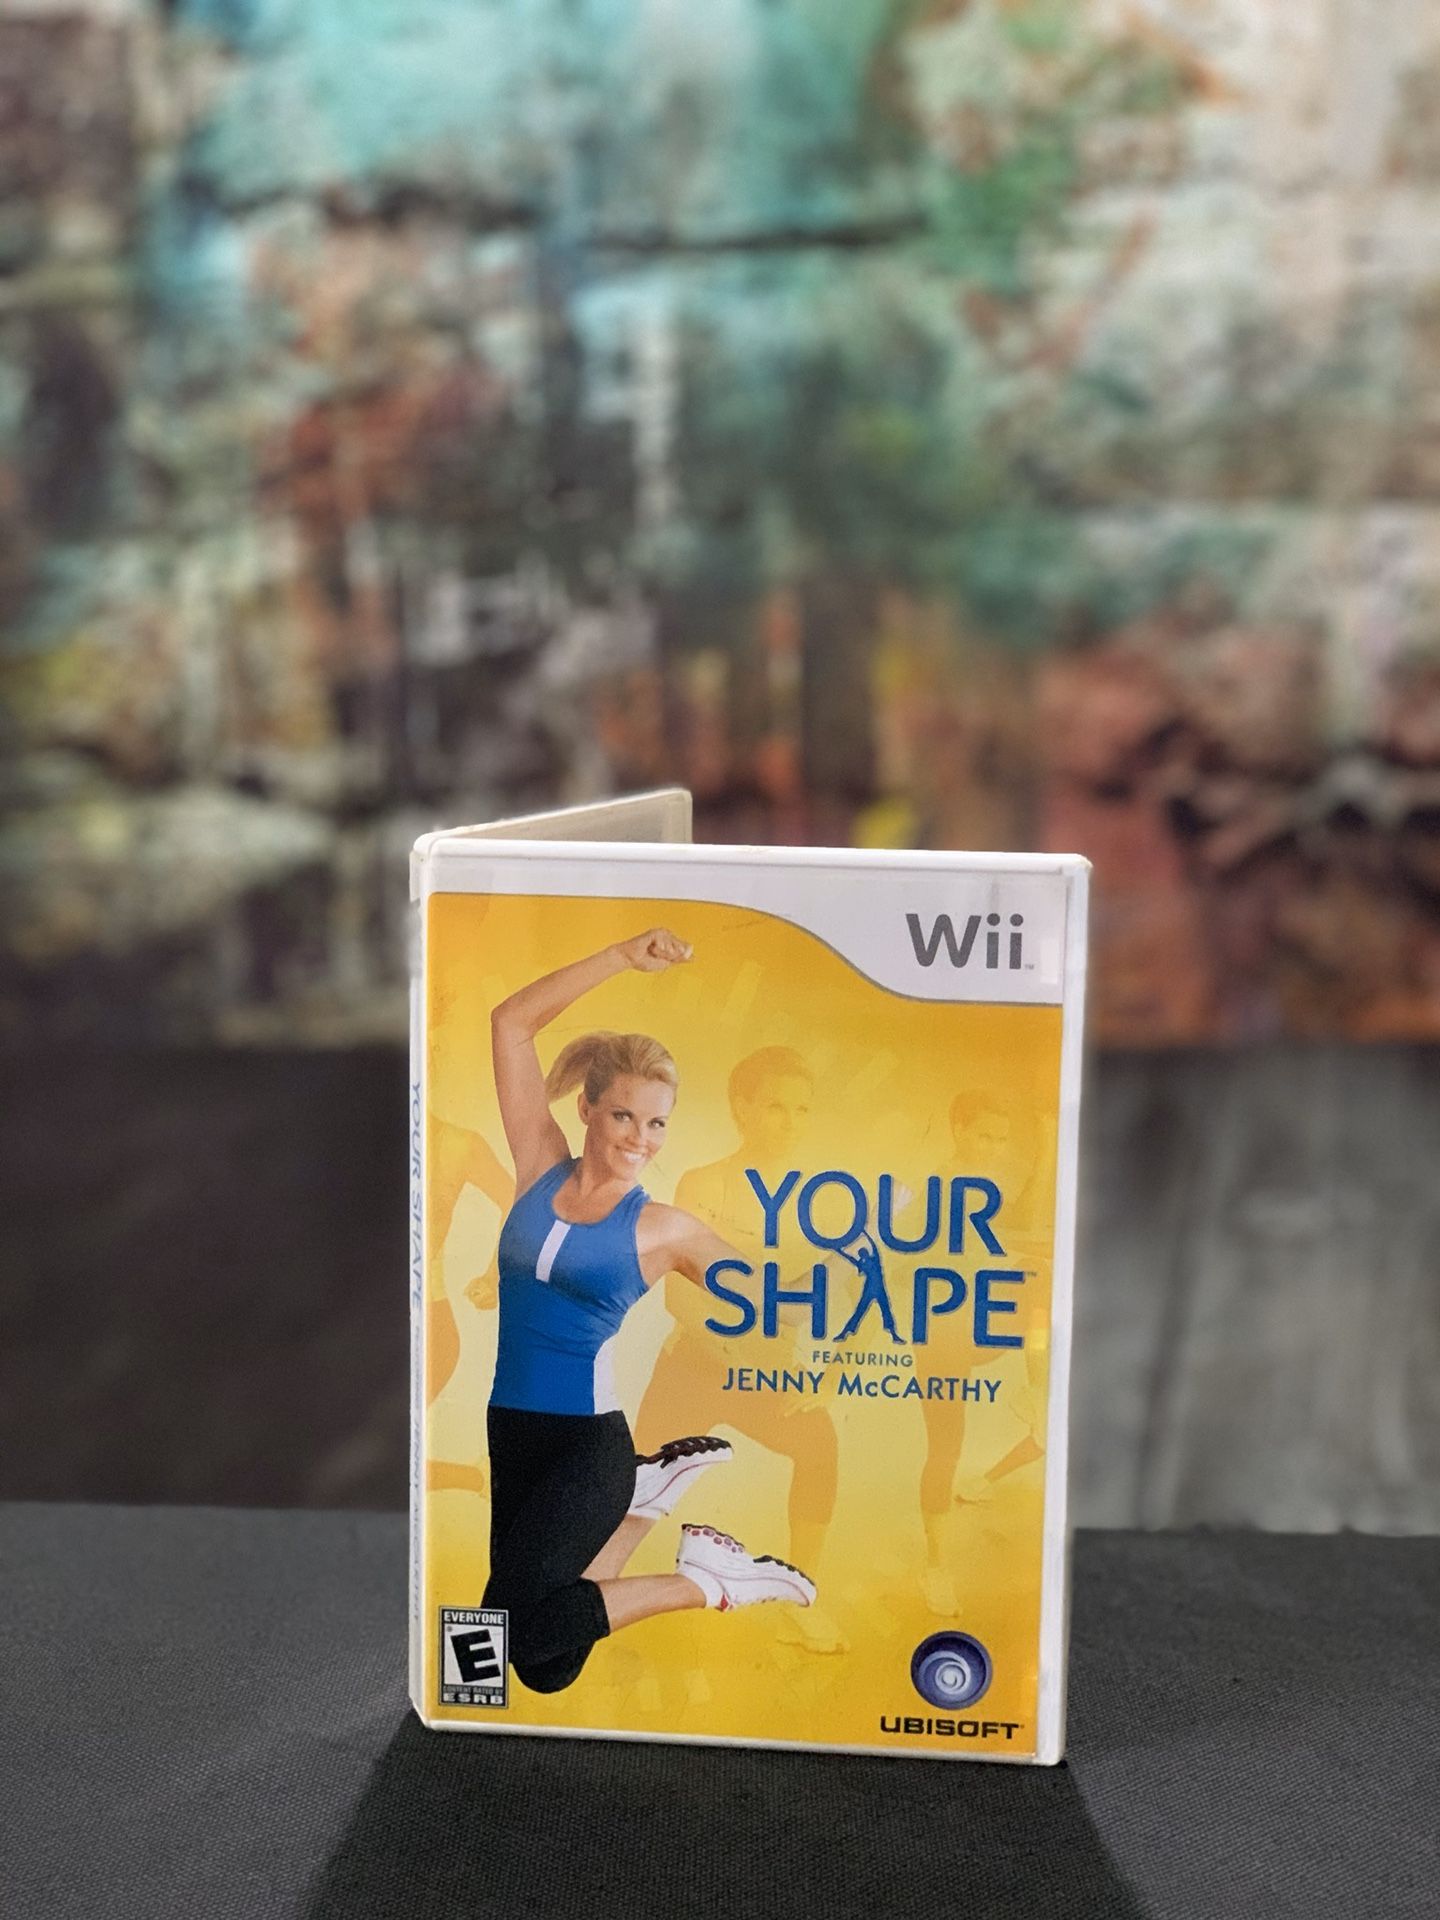 Wii your shape featuring Jenny McCarthy